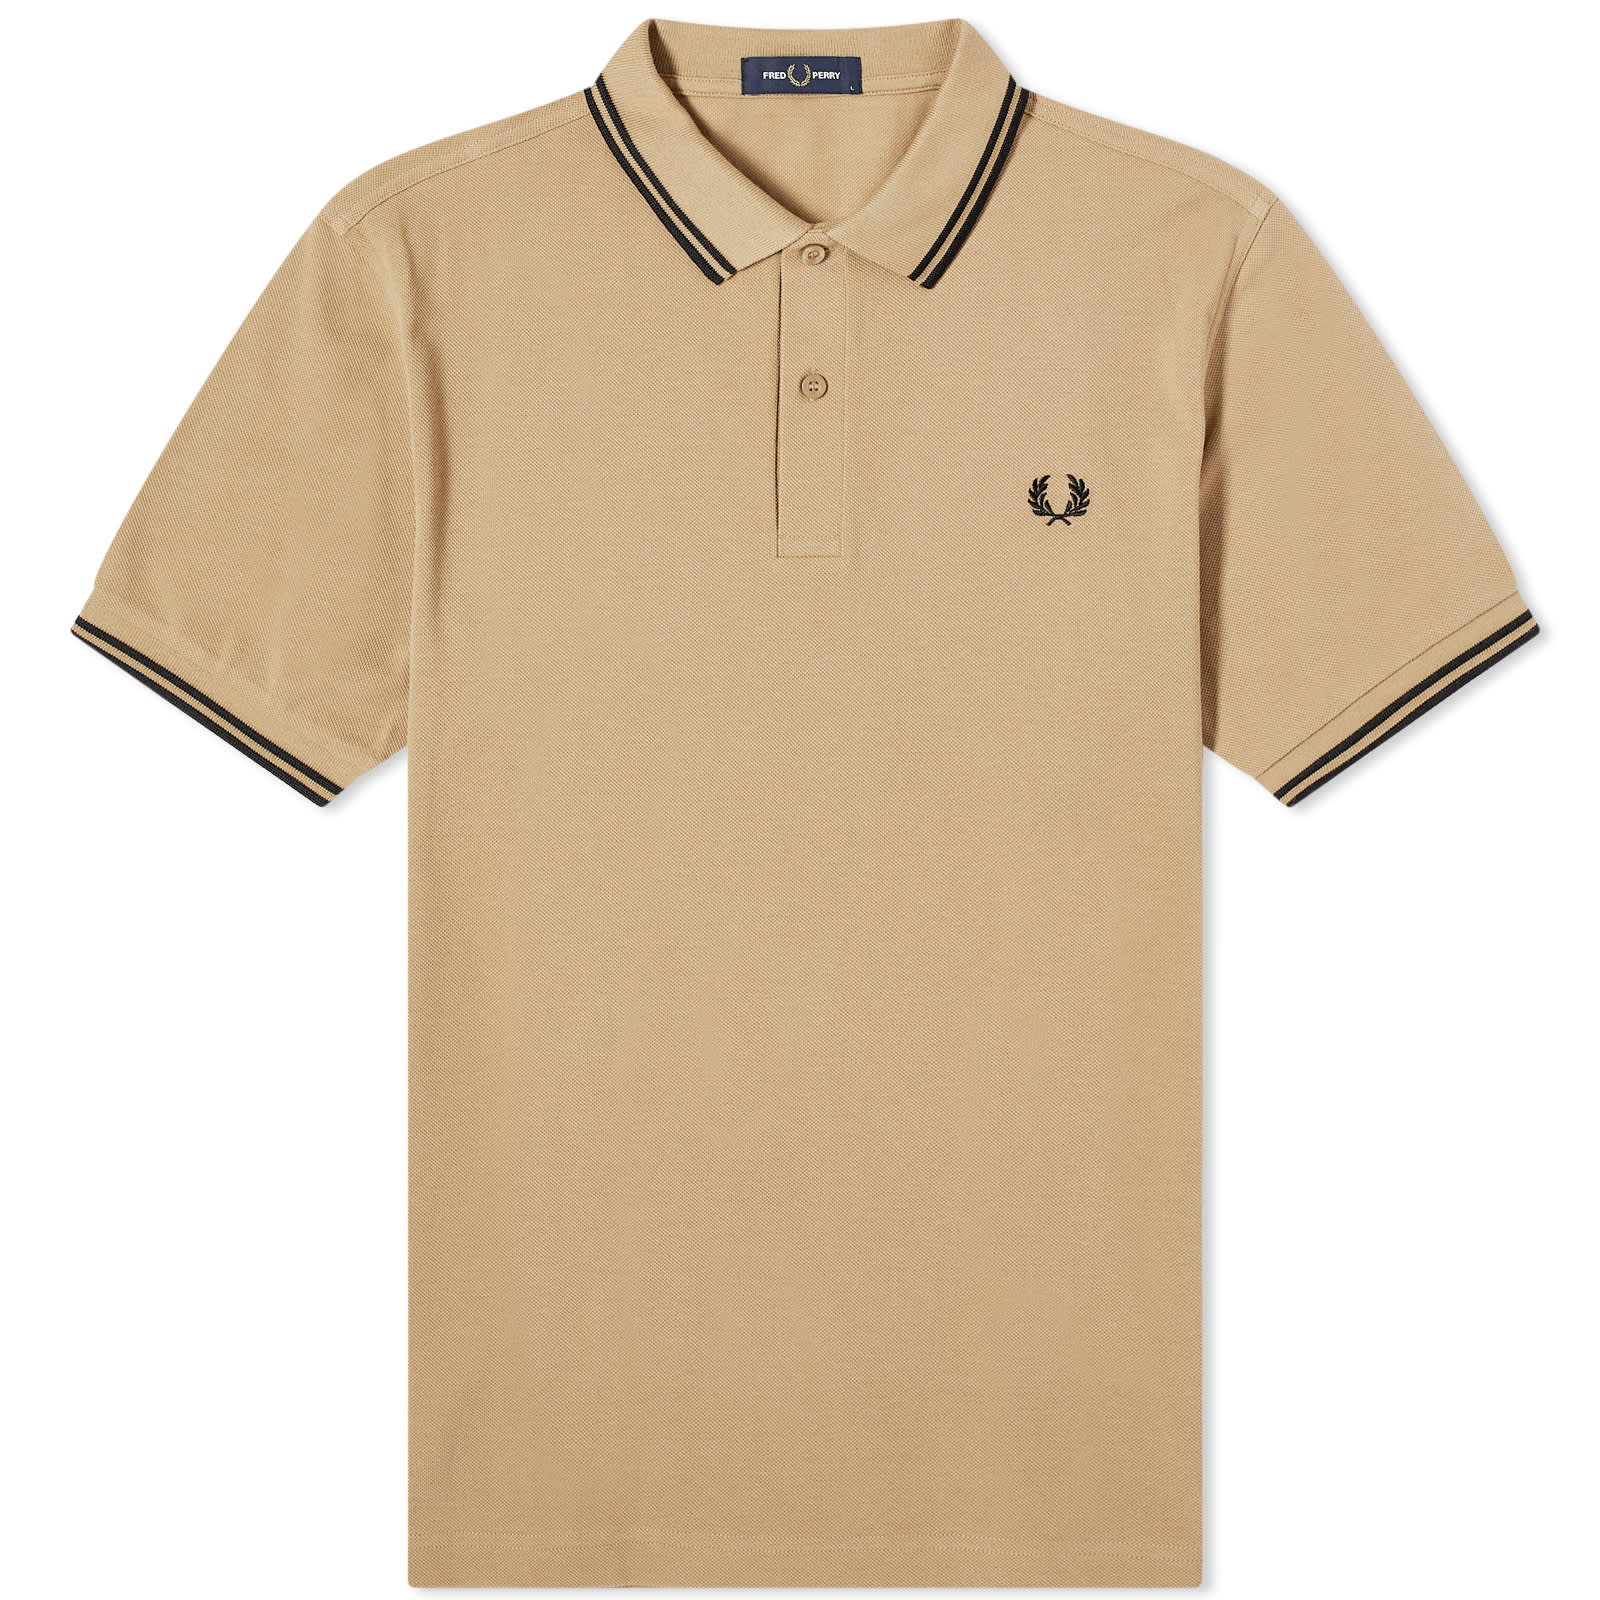 Поло Fred Perry Twin Tipped, цвет Warm Stone & Black толстовка fred perry towelling crew neck цвет warm stone